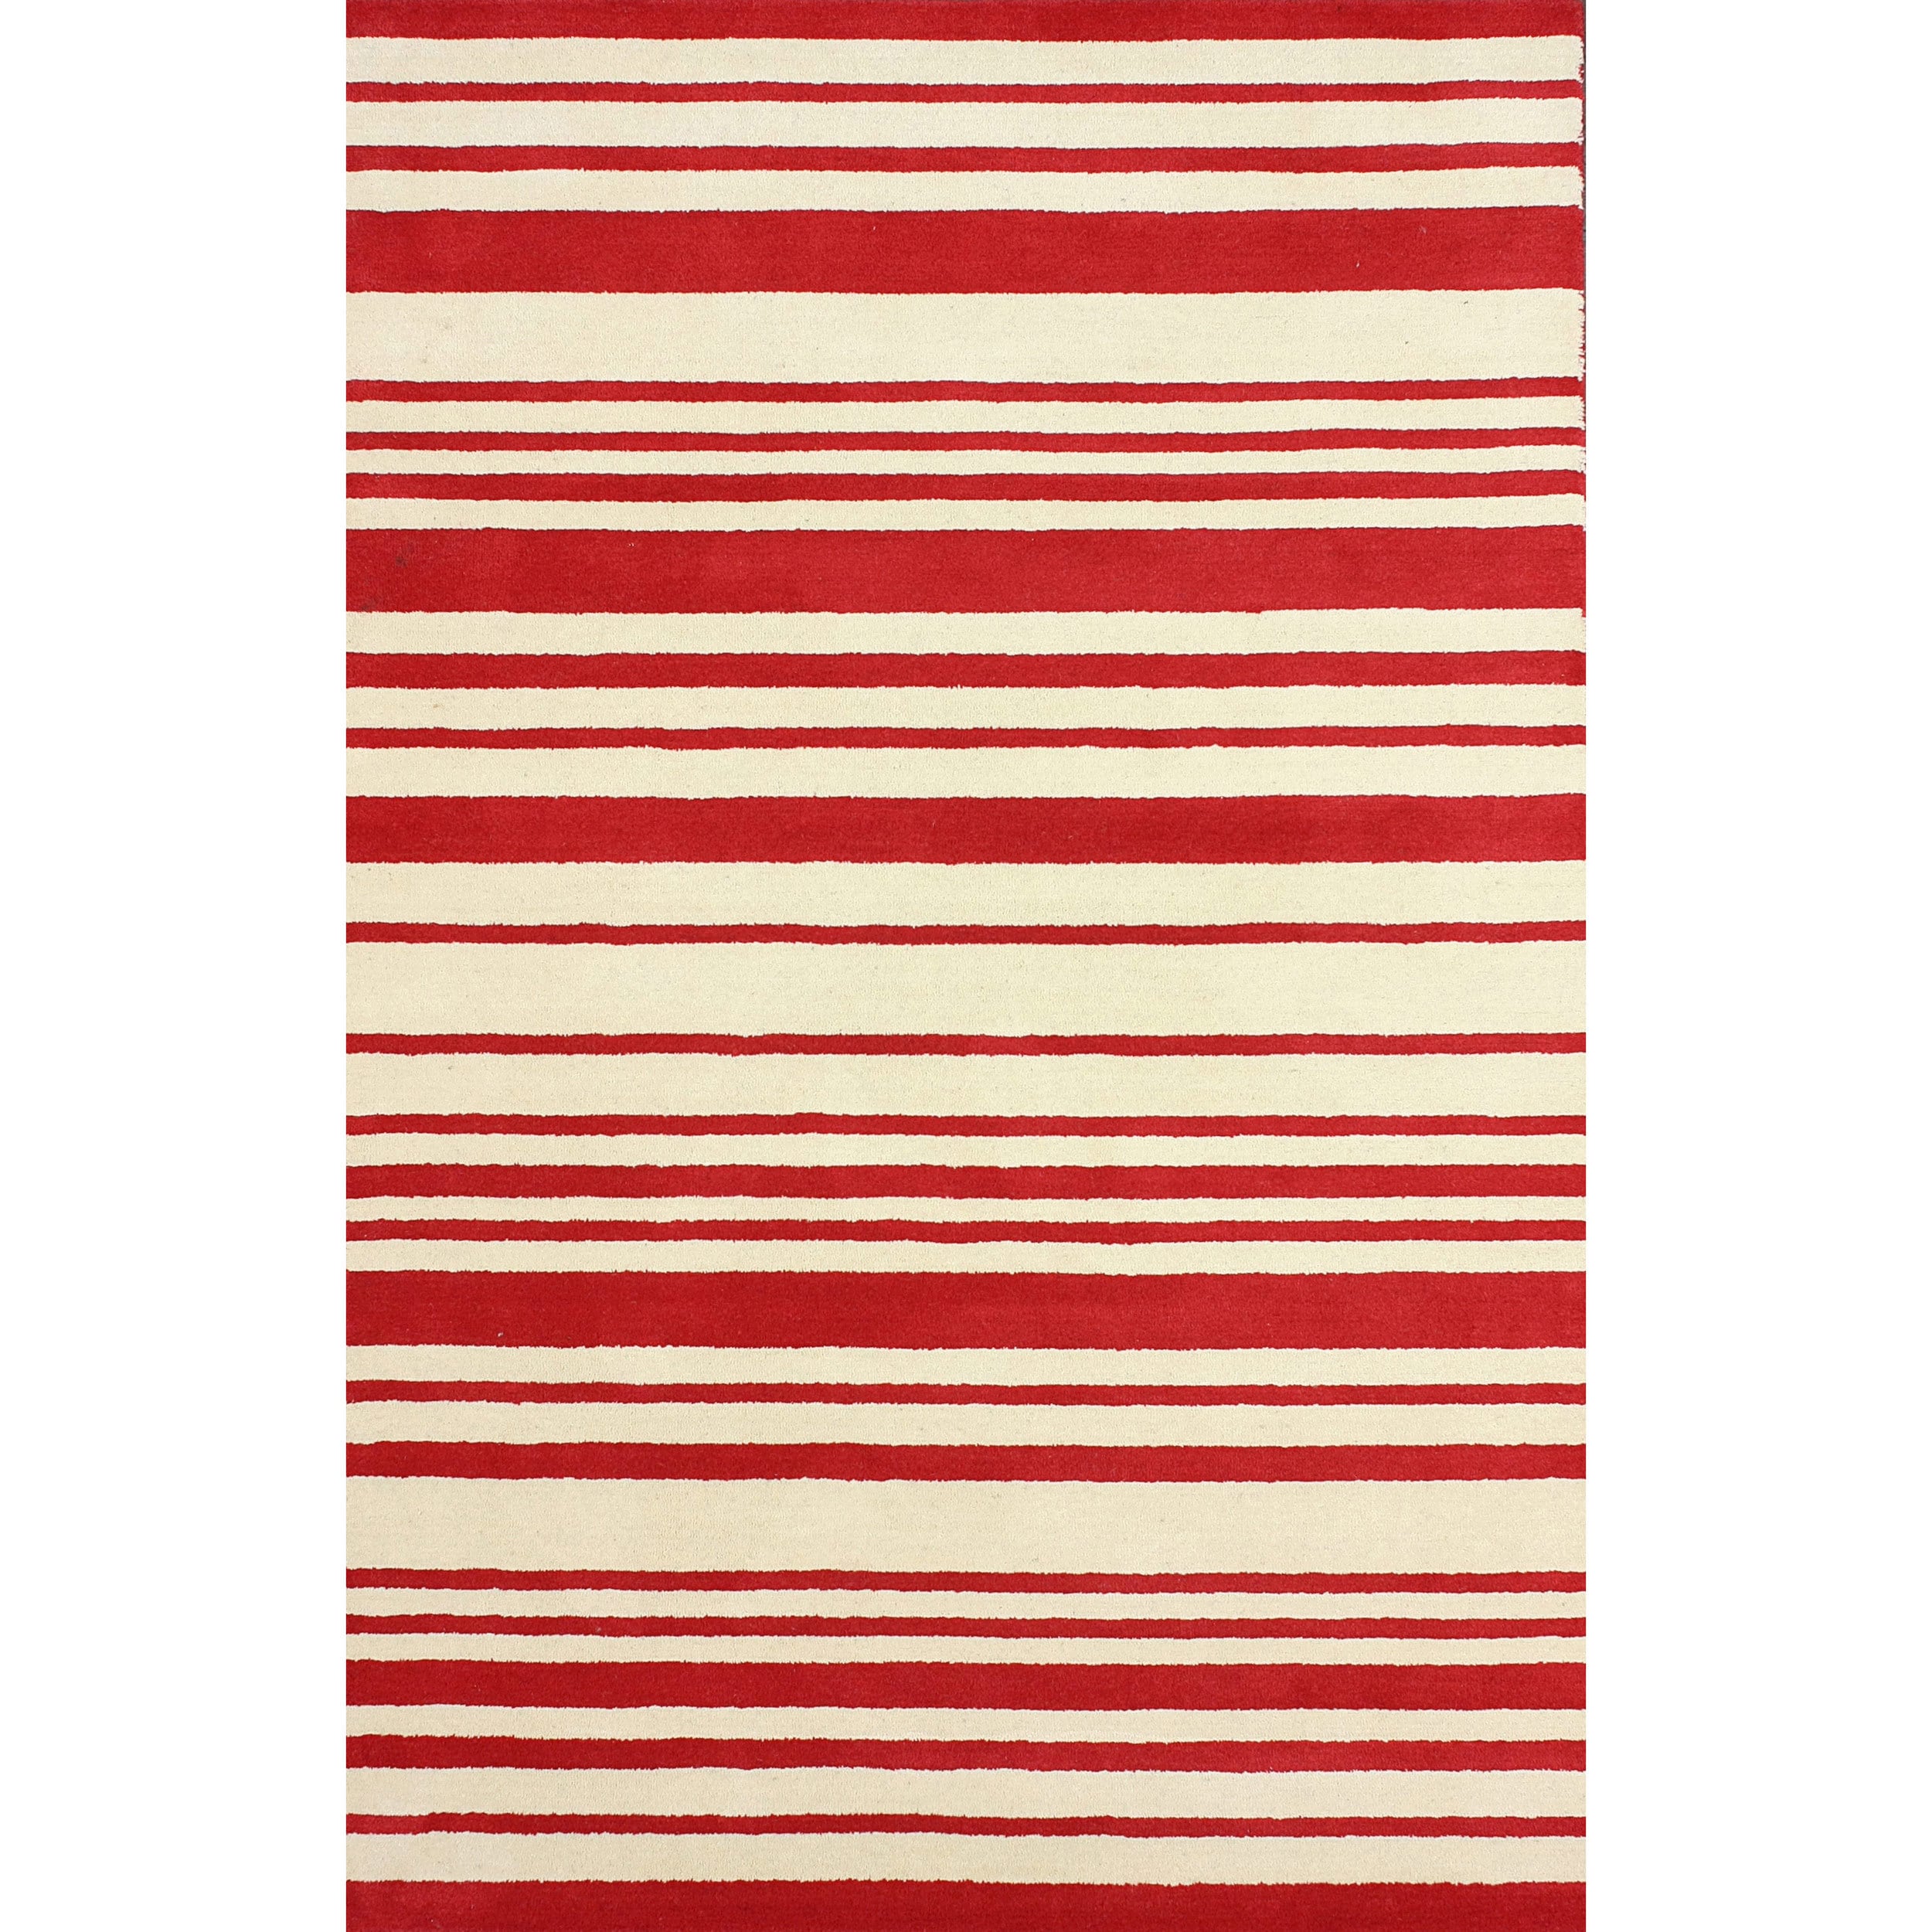 Nuloom Hand tufted Modern Stripes Red New Zealand Wool Rug (5 X 8)